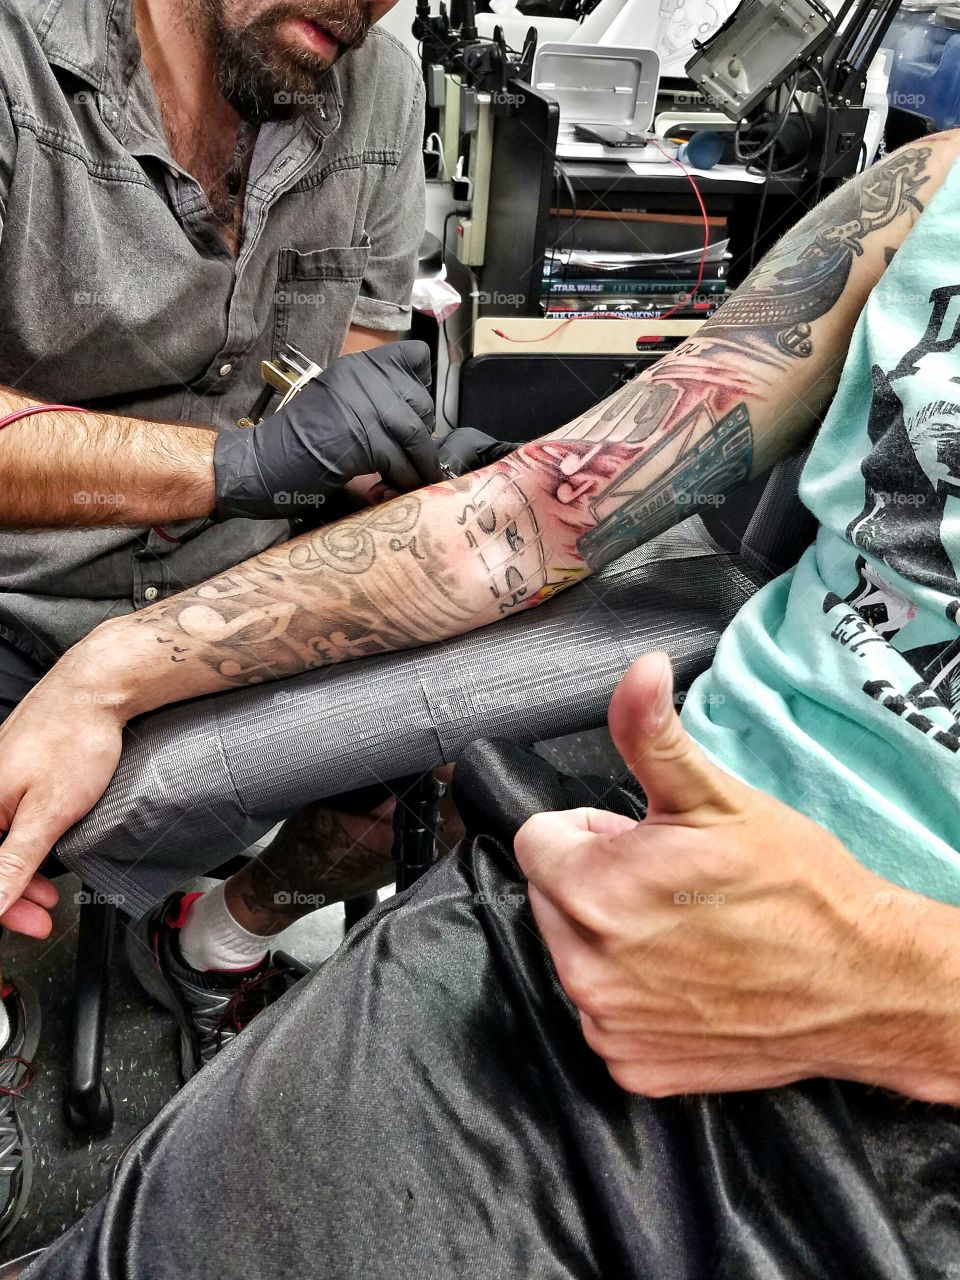 My best friend getting his tattoo sleeve finished.